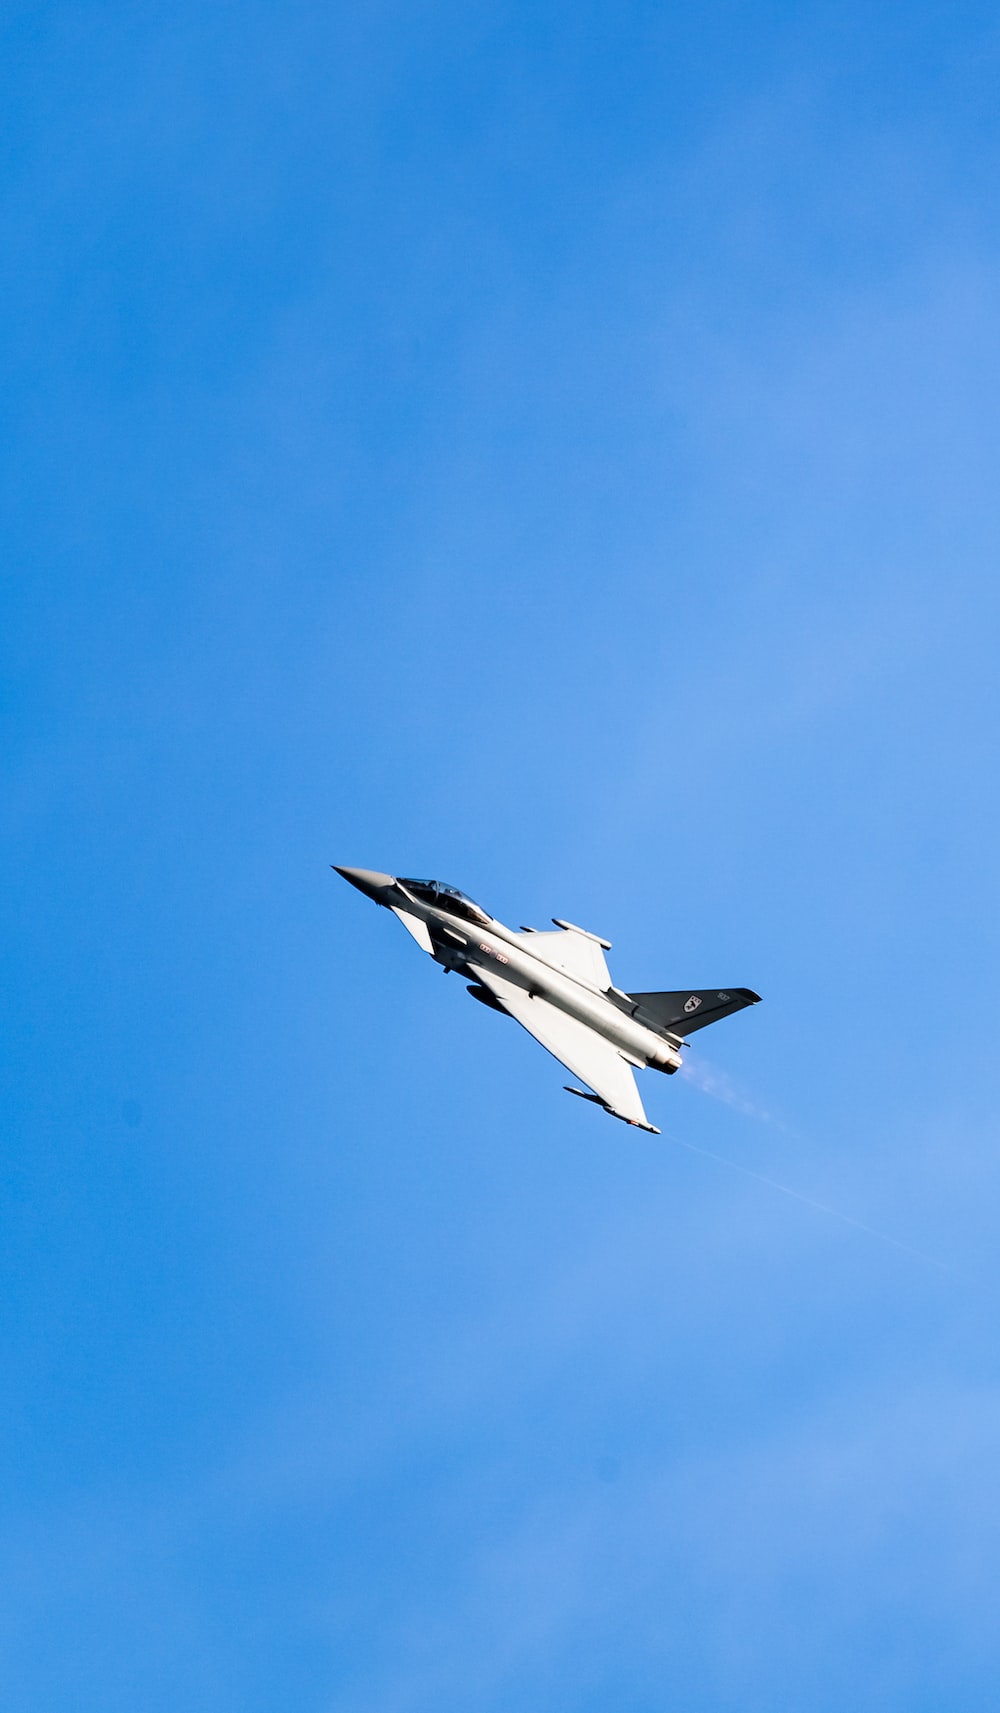 white and black jet plane in mid air during daytime photo